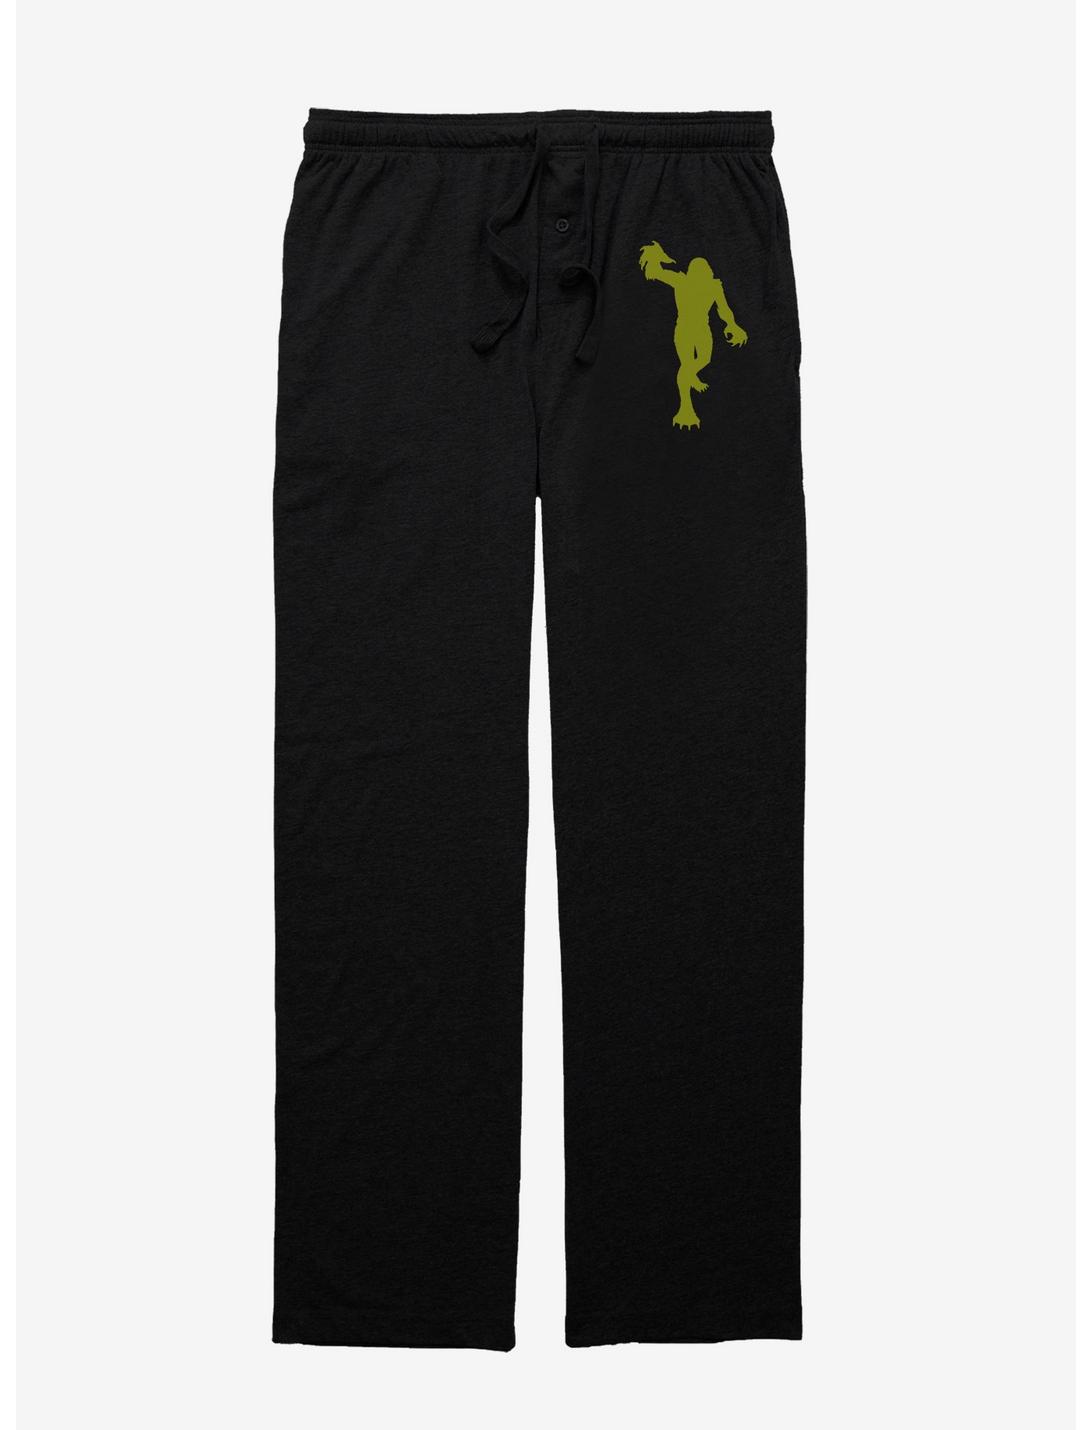 Creature From The Black Lagoon Silhouette Pajama Pants, , hi-res